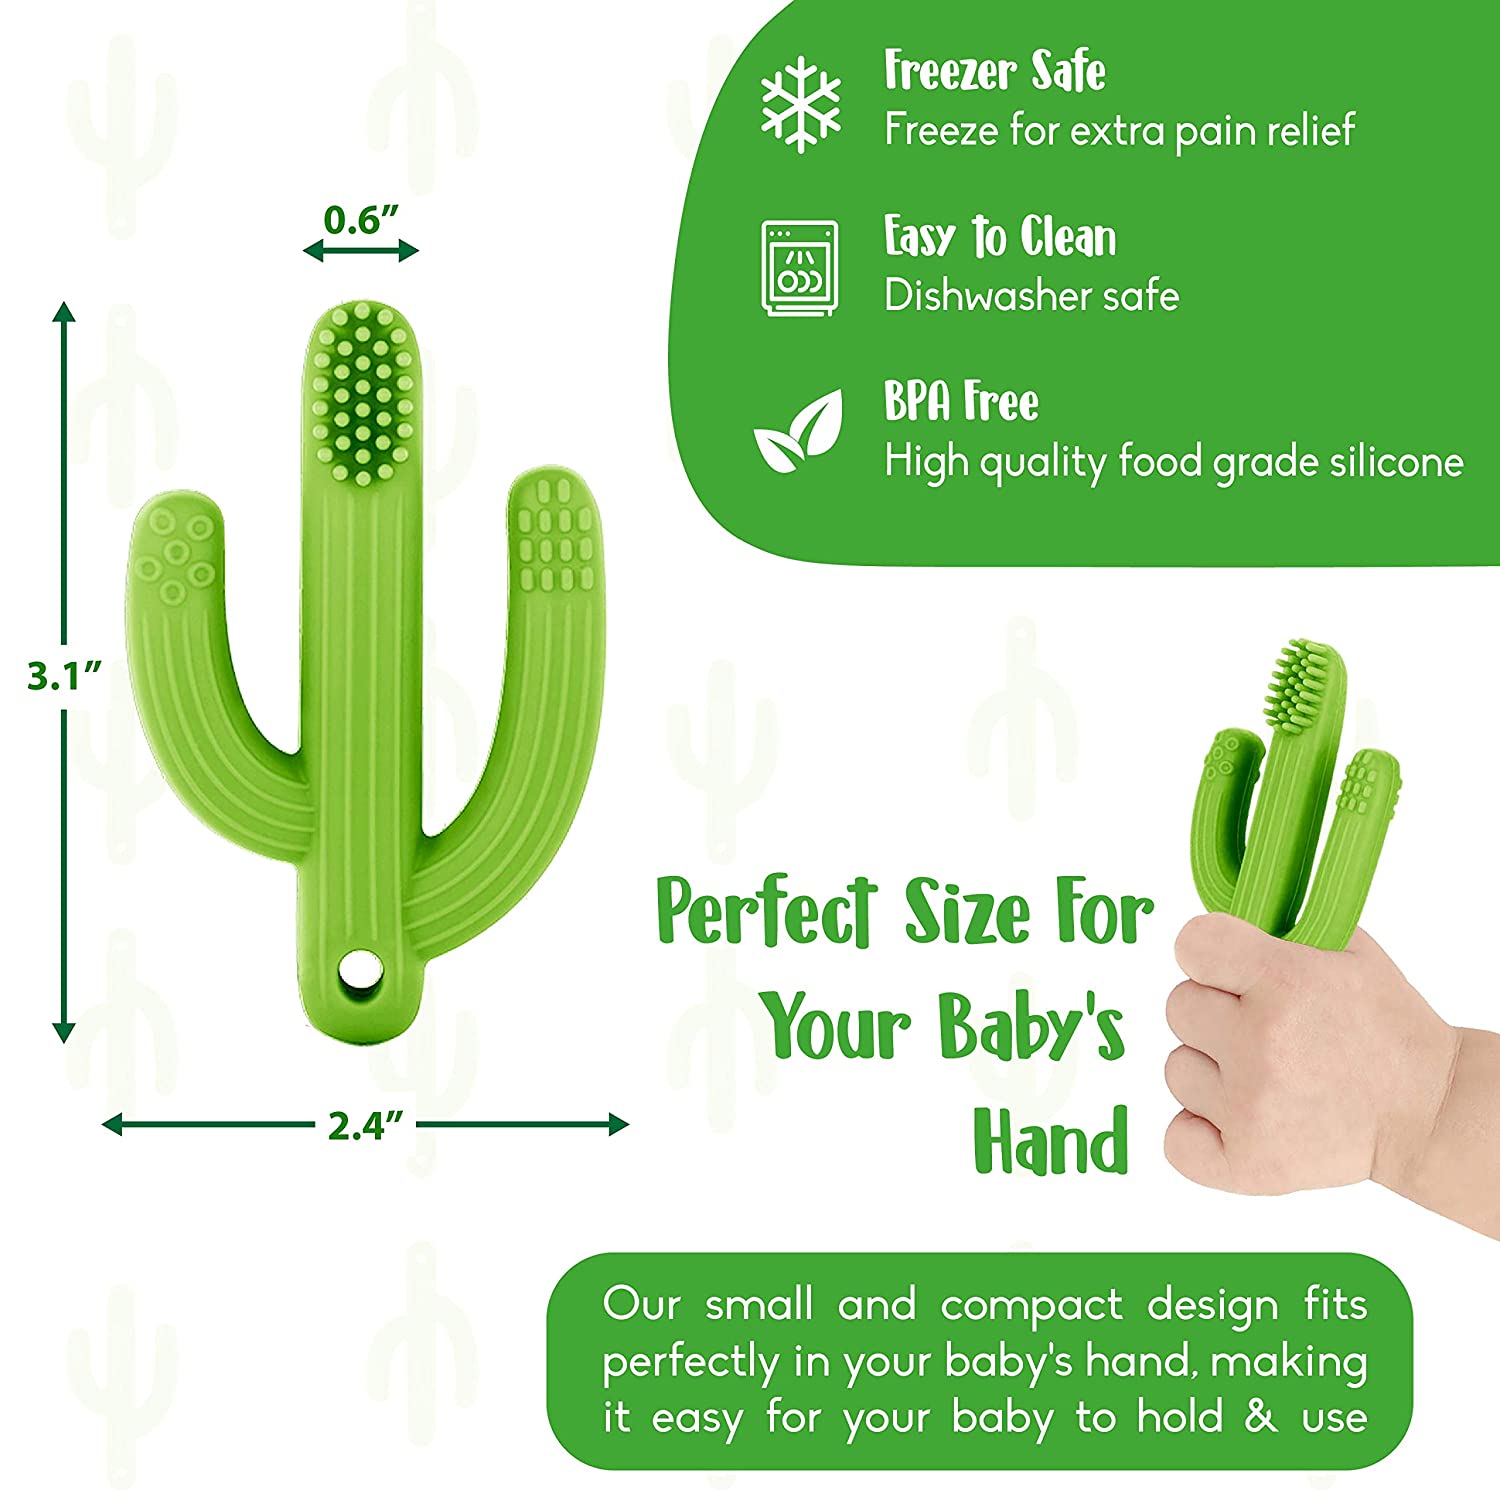 Cactus Baby Teething Toys for Newborn Infants and Toddlers - Self-Soothing Pain Relief Soft Silicone Teether and Training Toothbrush for Babies, BPA Free, Soothes Babies Sore Gums